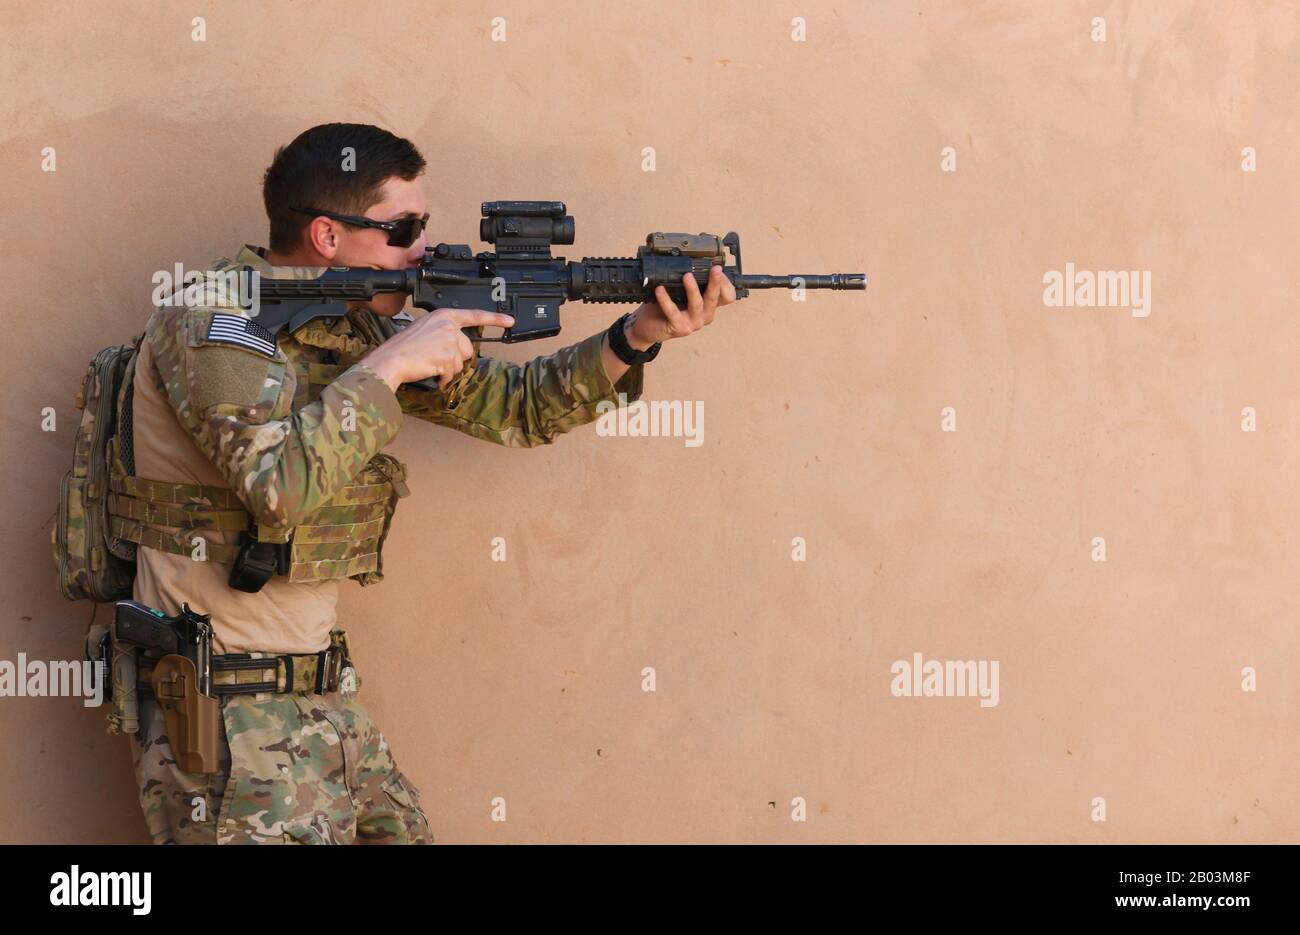 U.S. Air Force Senior Airman Steven Chaney, 409th Expeditionary Security Forces Squadron Response Force, conducts building clearing procedures during a close quarters battle refresher course at Nigerian Air Base 201 February 5, 2020 in Agadez, Niger. Stock Photo